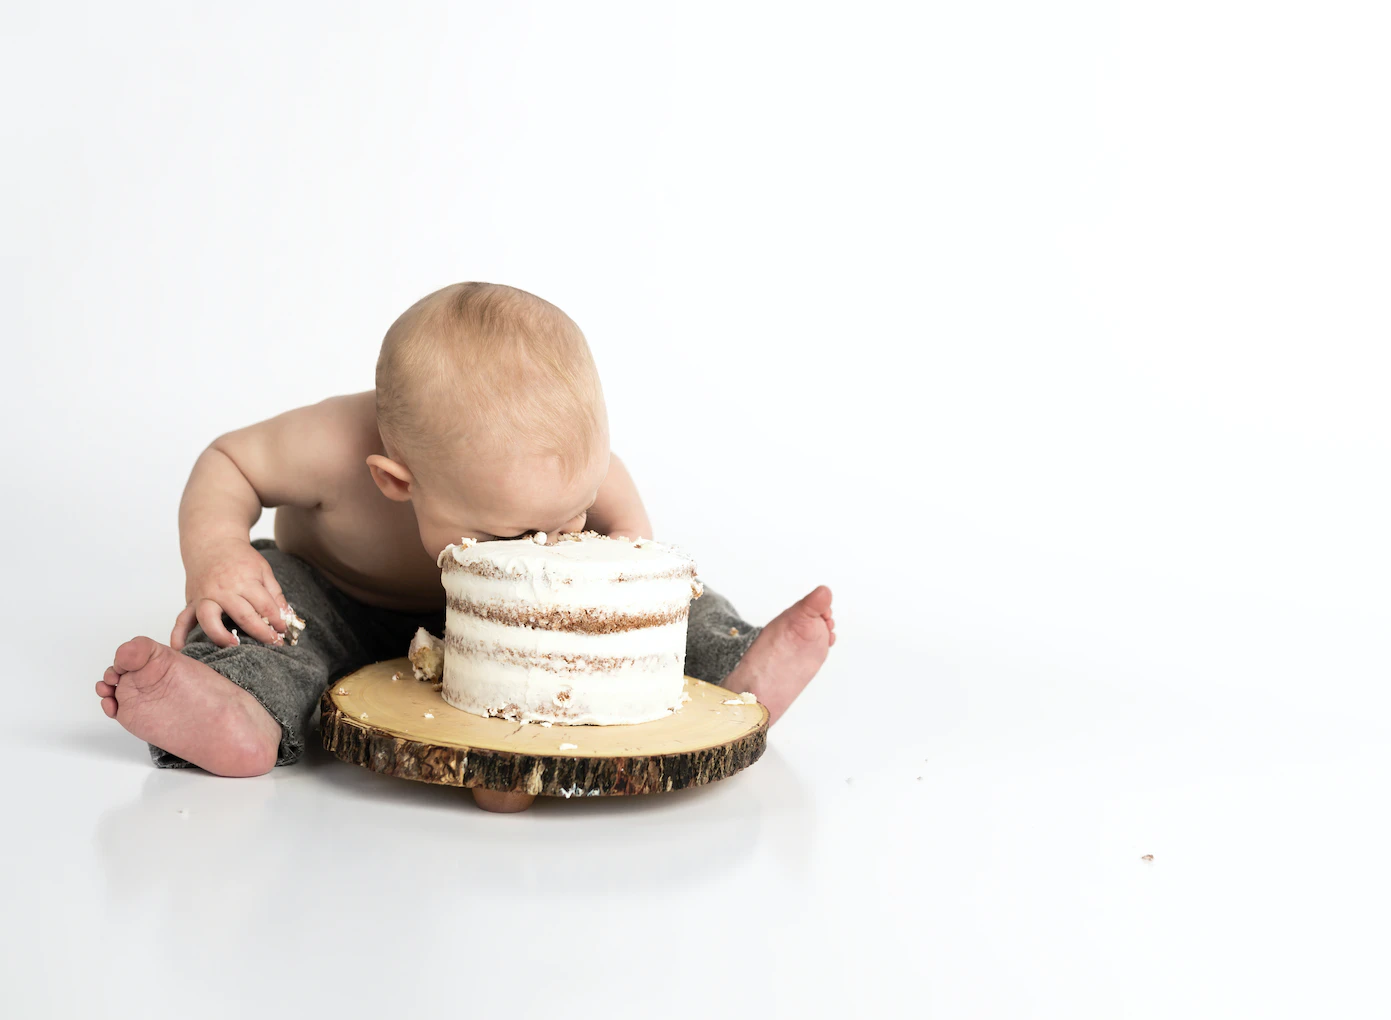 A baby eating a whole cake against a white background